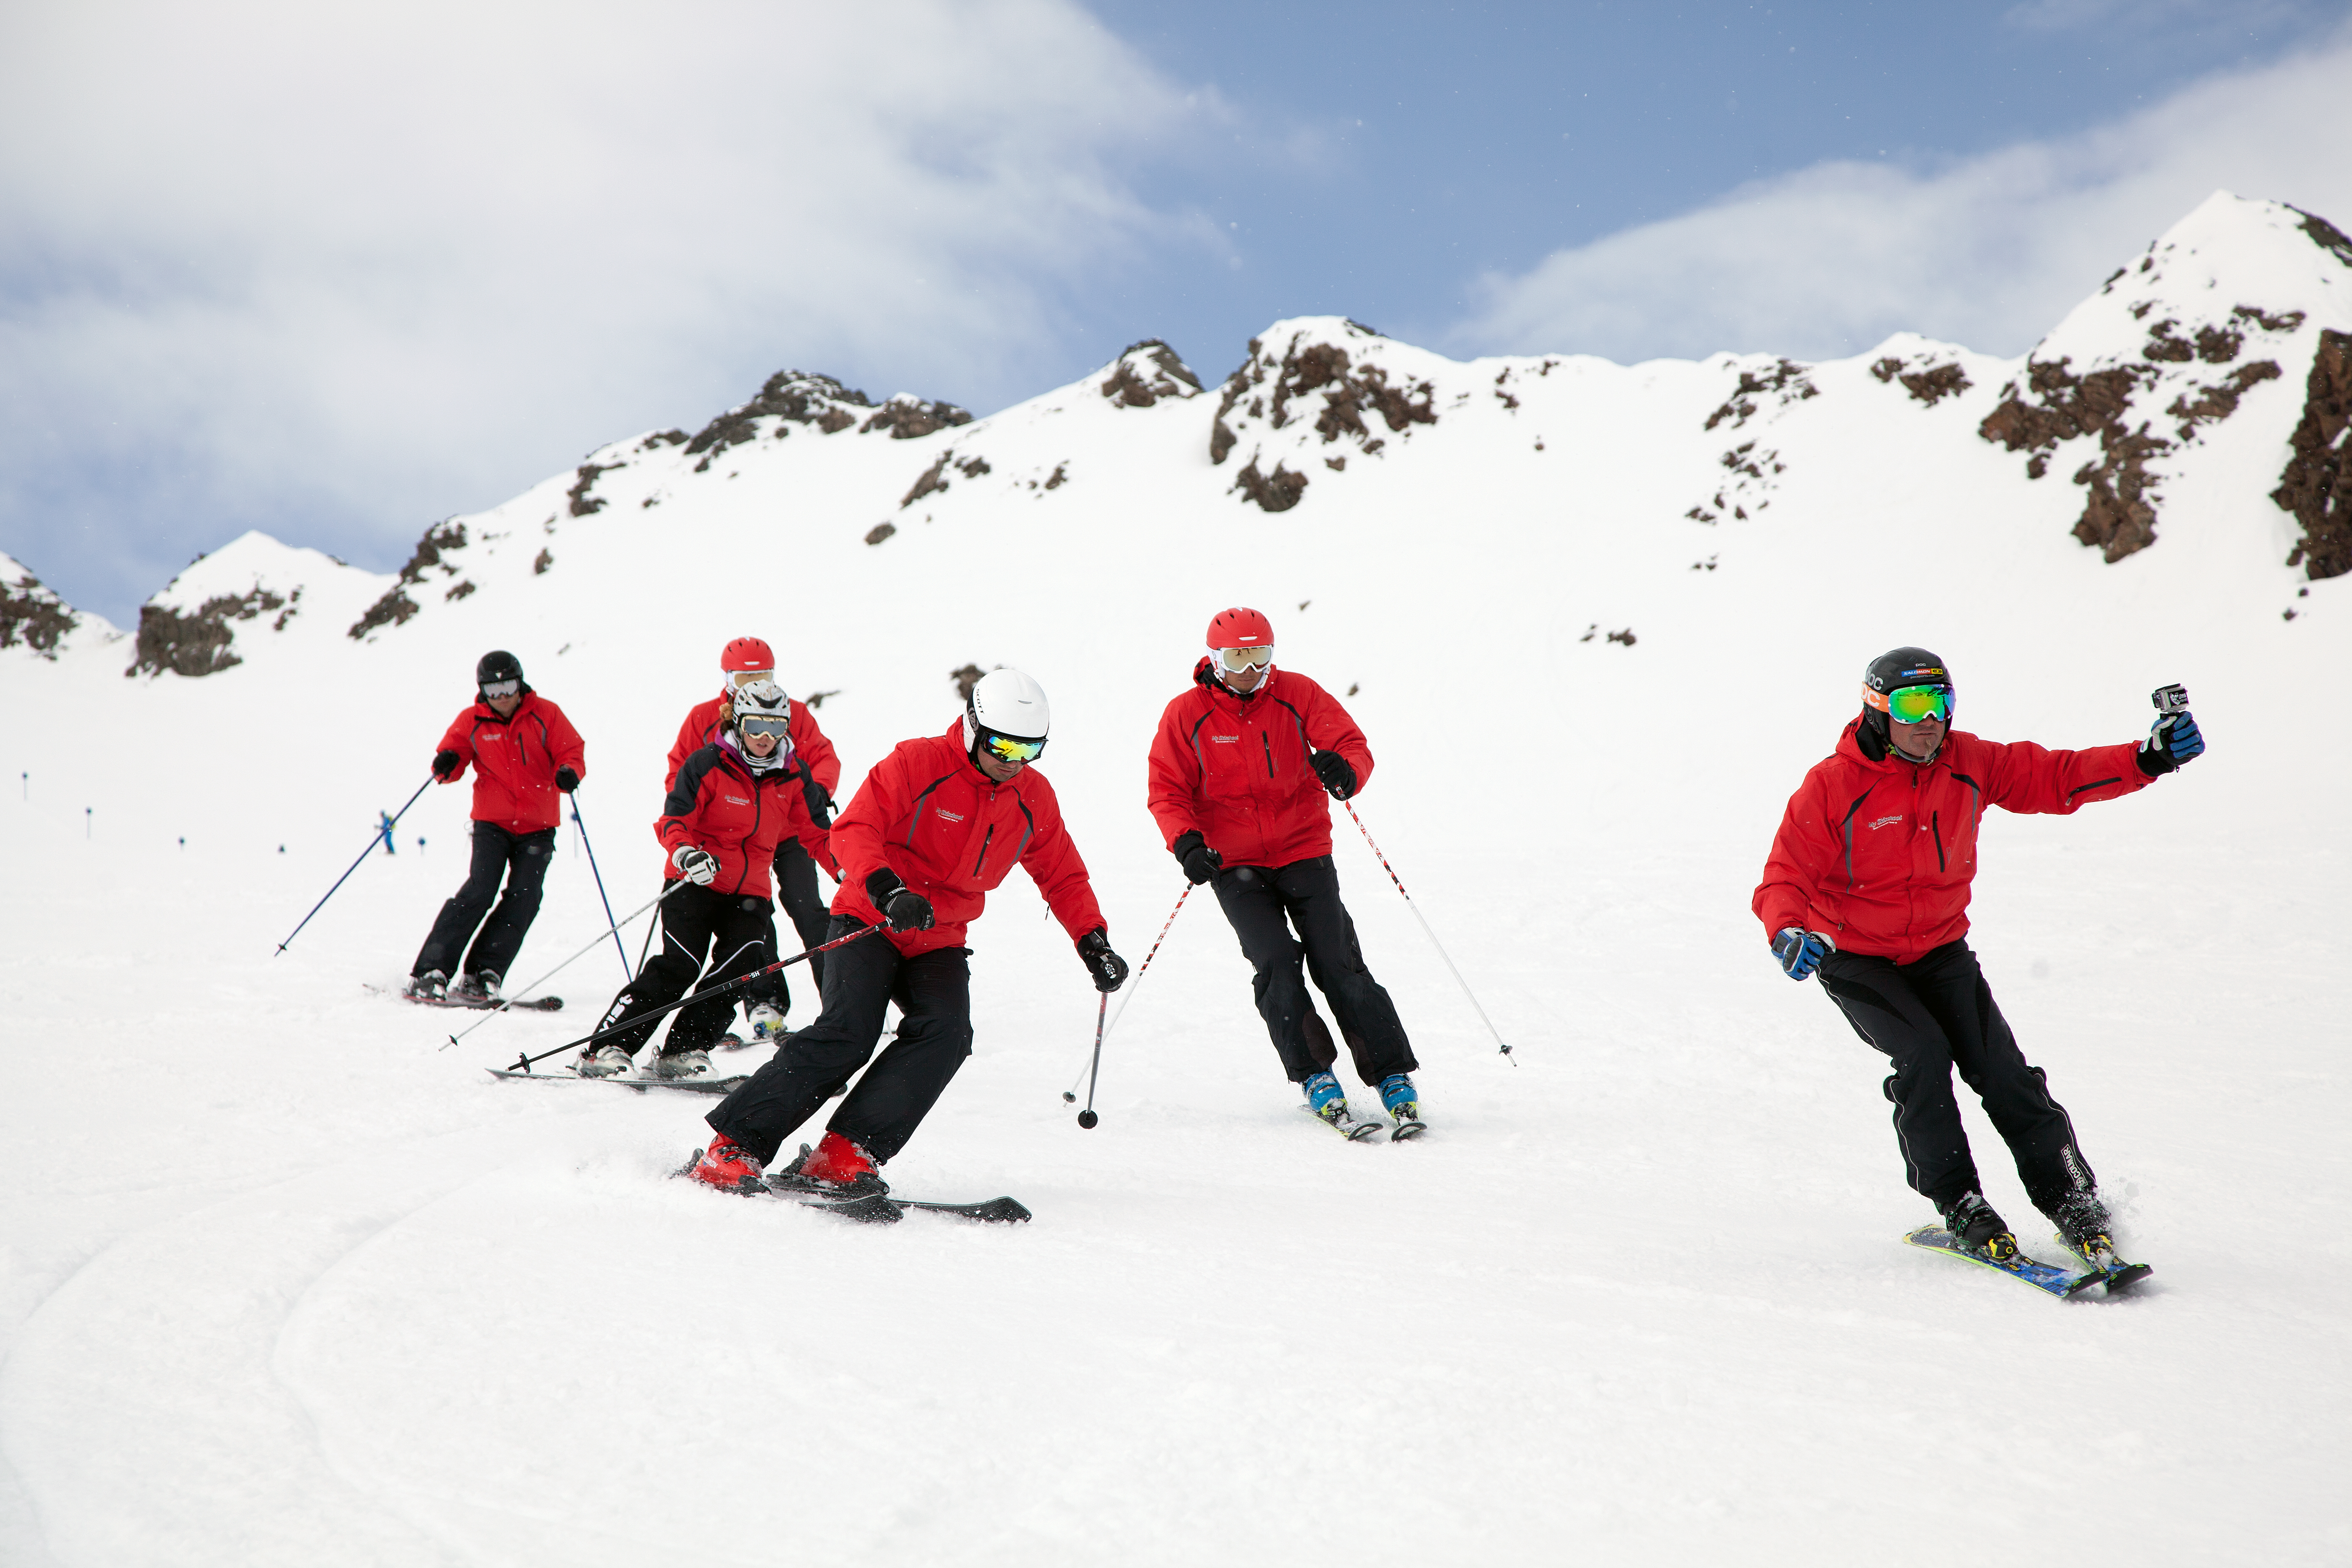 My Ski School was born from passion and desire to inspire you with the secr...